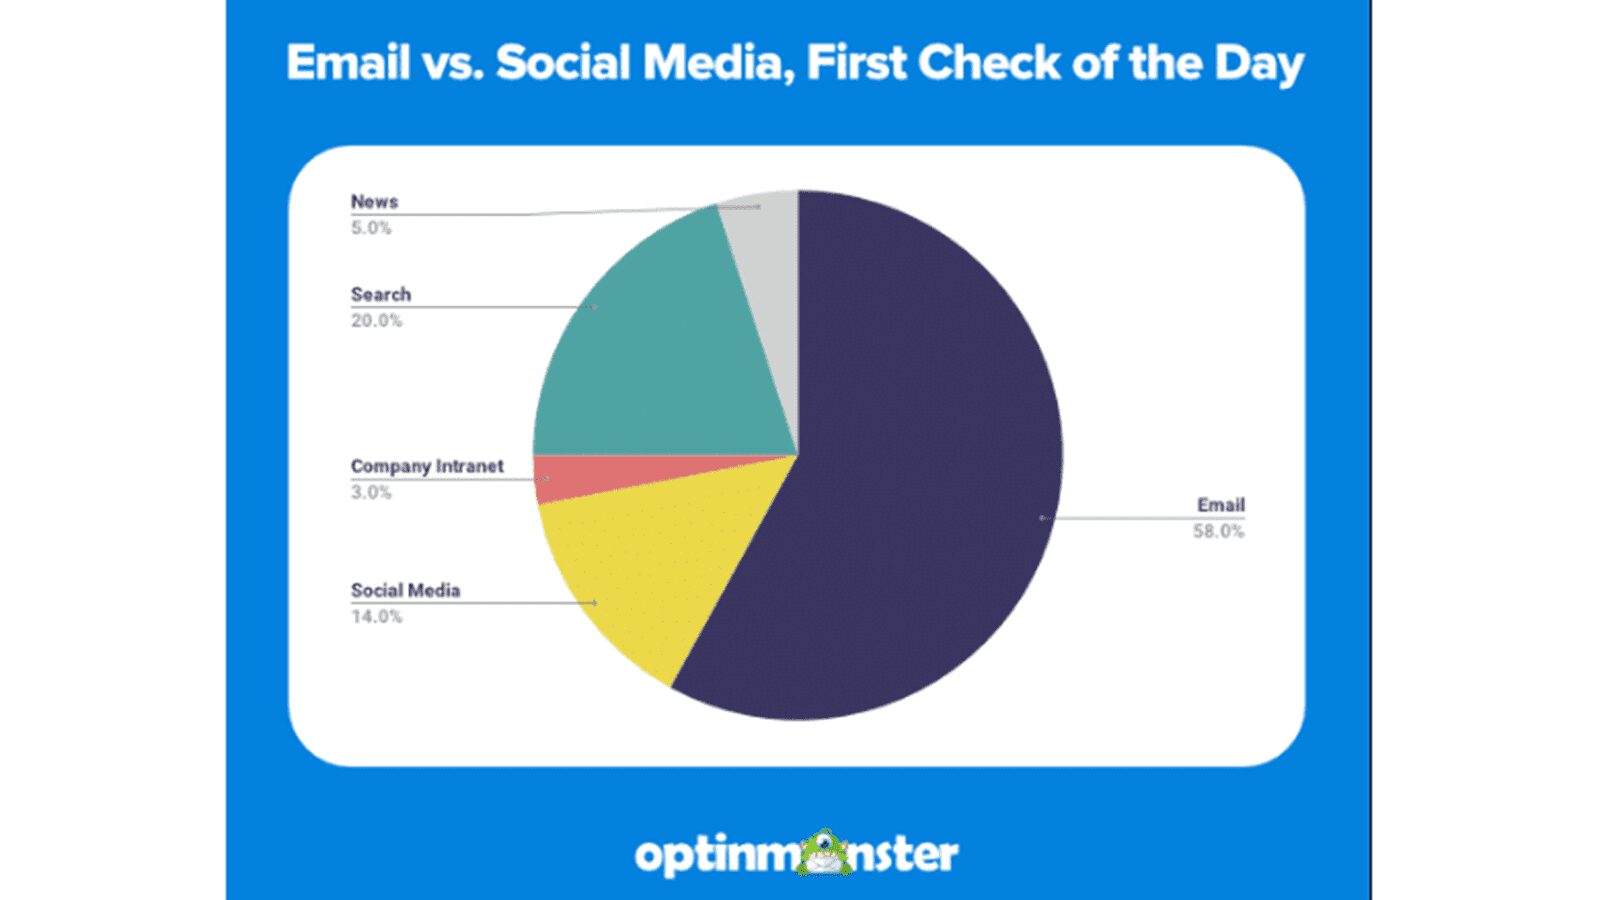 A pie graph of "Email vs Social Media" in digital marketing showing News with 5%, Search with 20%, Company Intranet with 3%, Social Media 14% and E-mail with 58% in Digital Marketing.

Digital Marketing. Marketing digital. Search engine optimization. Marketing strategies.